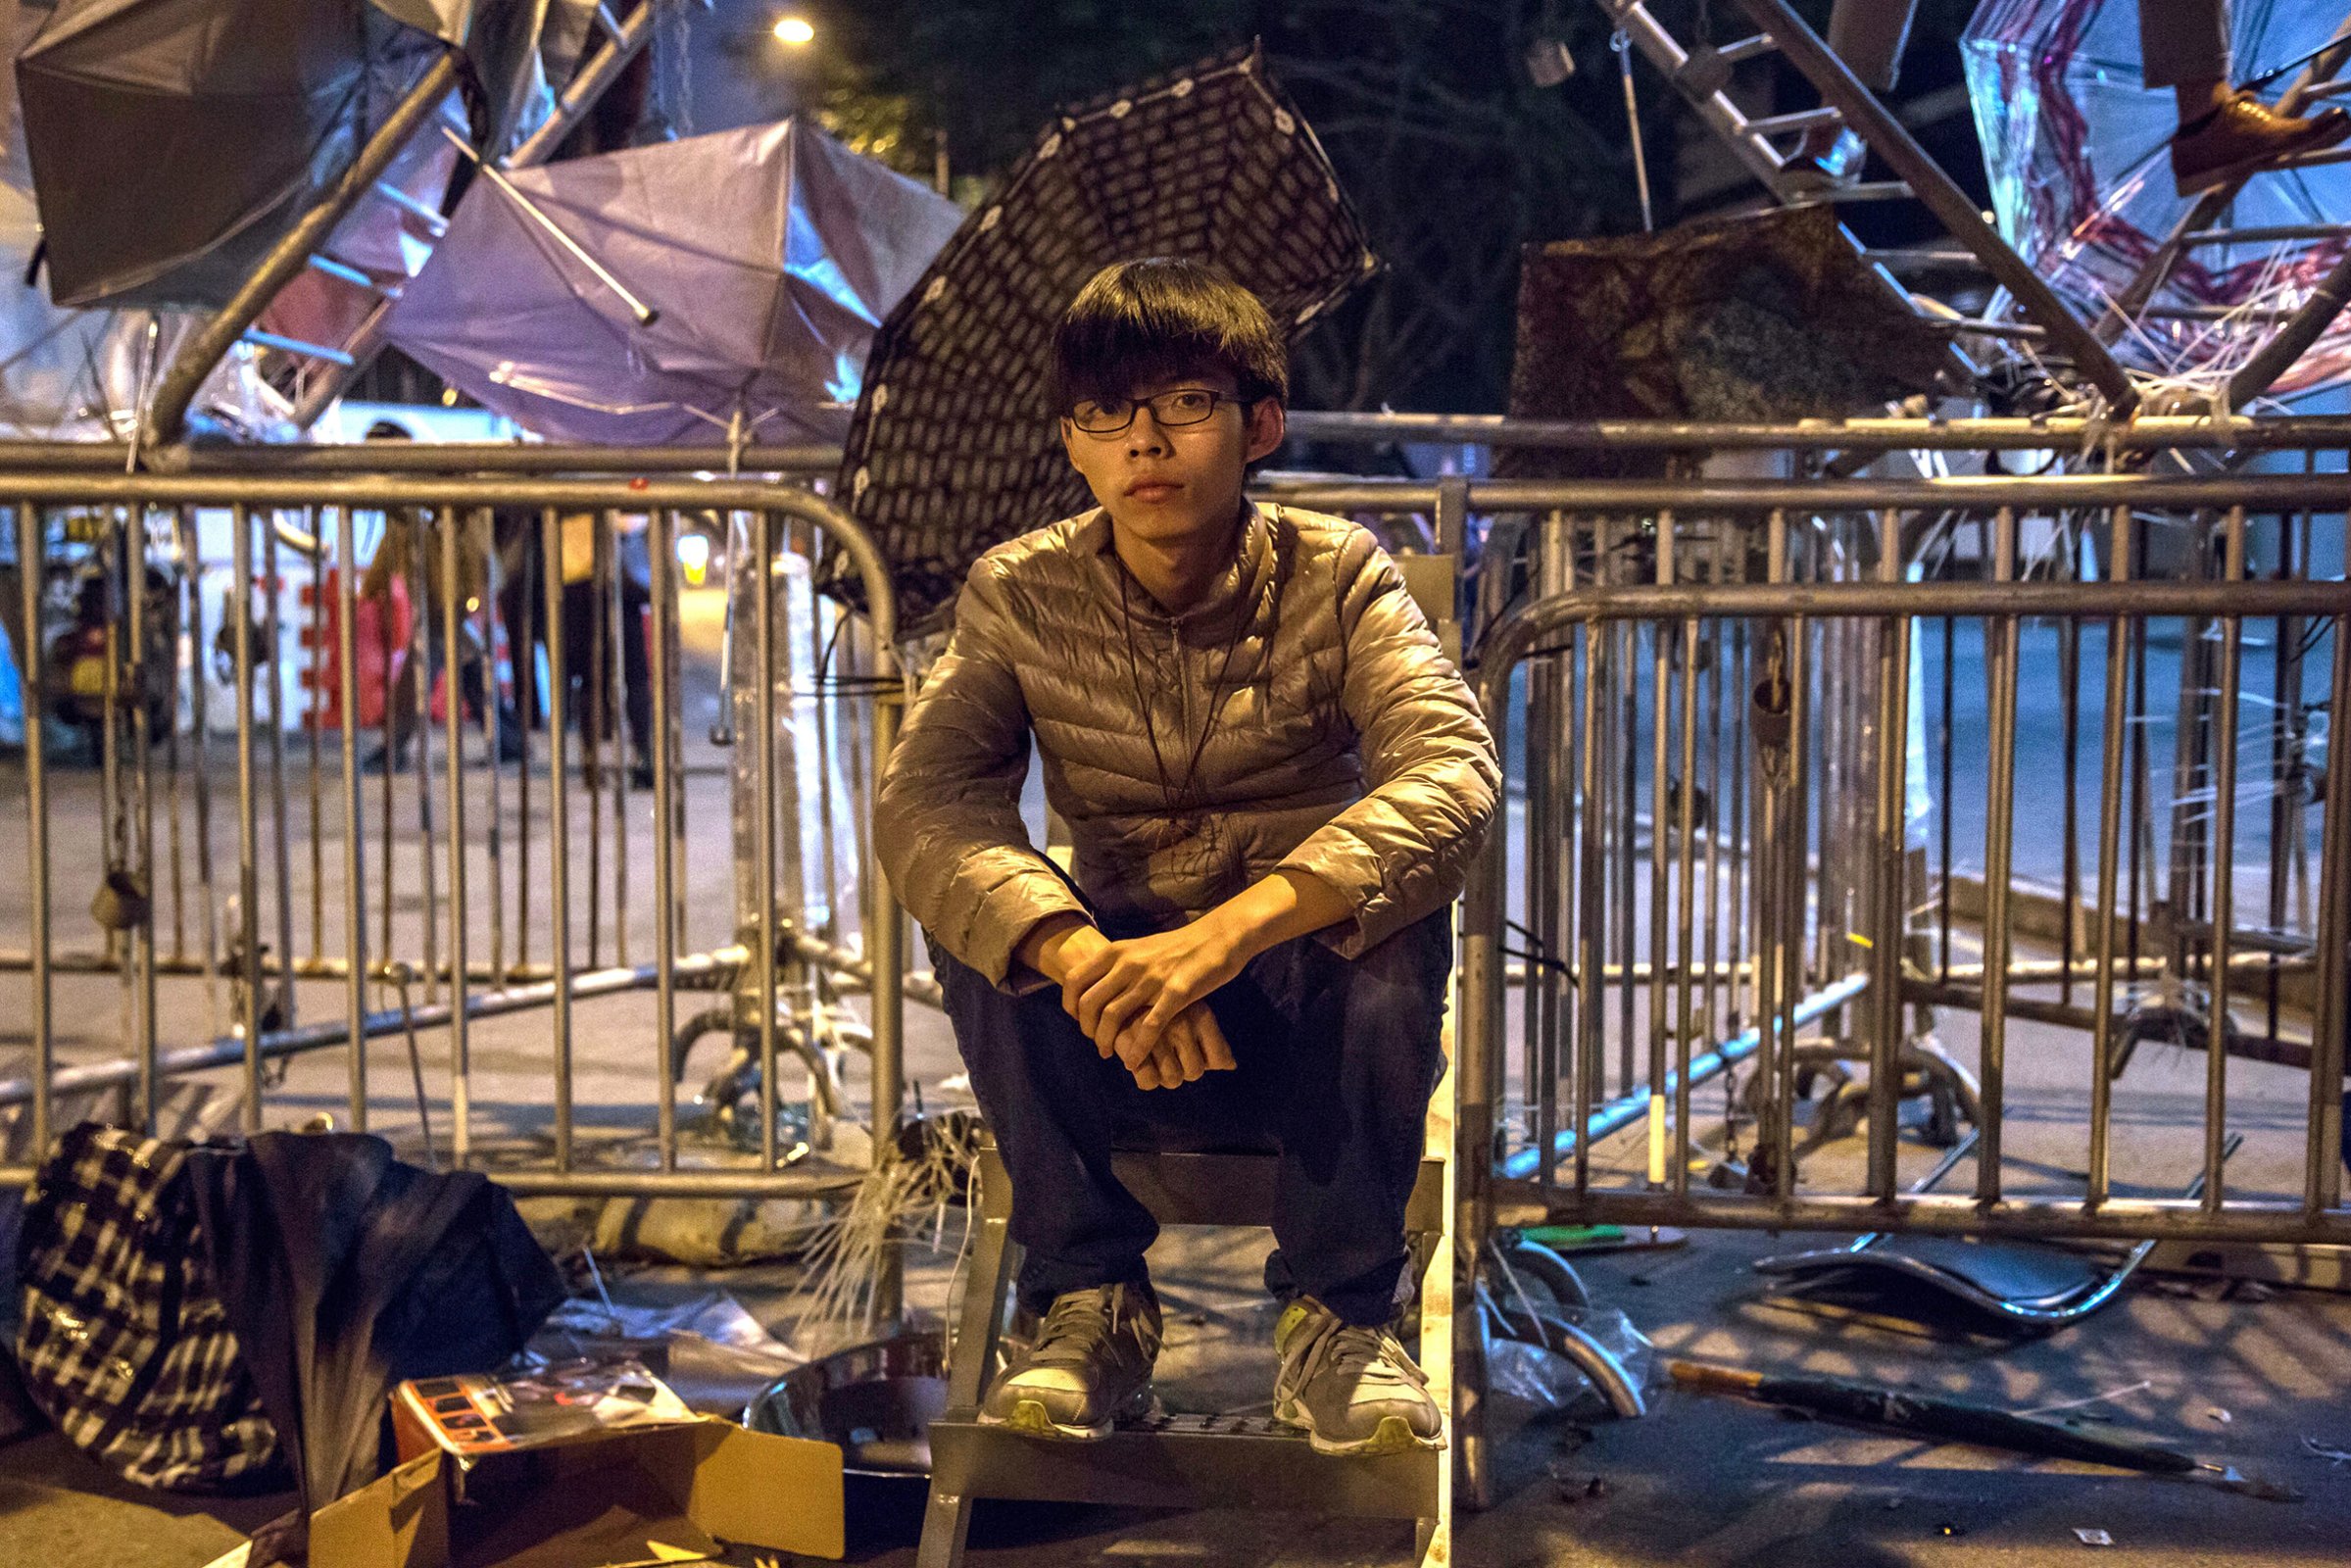 Wong helped kick-start the Umbrella Movement protests in 2014, when he was 17 years old